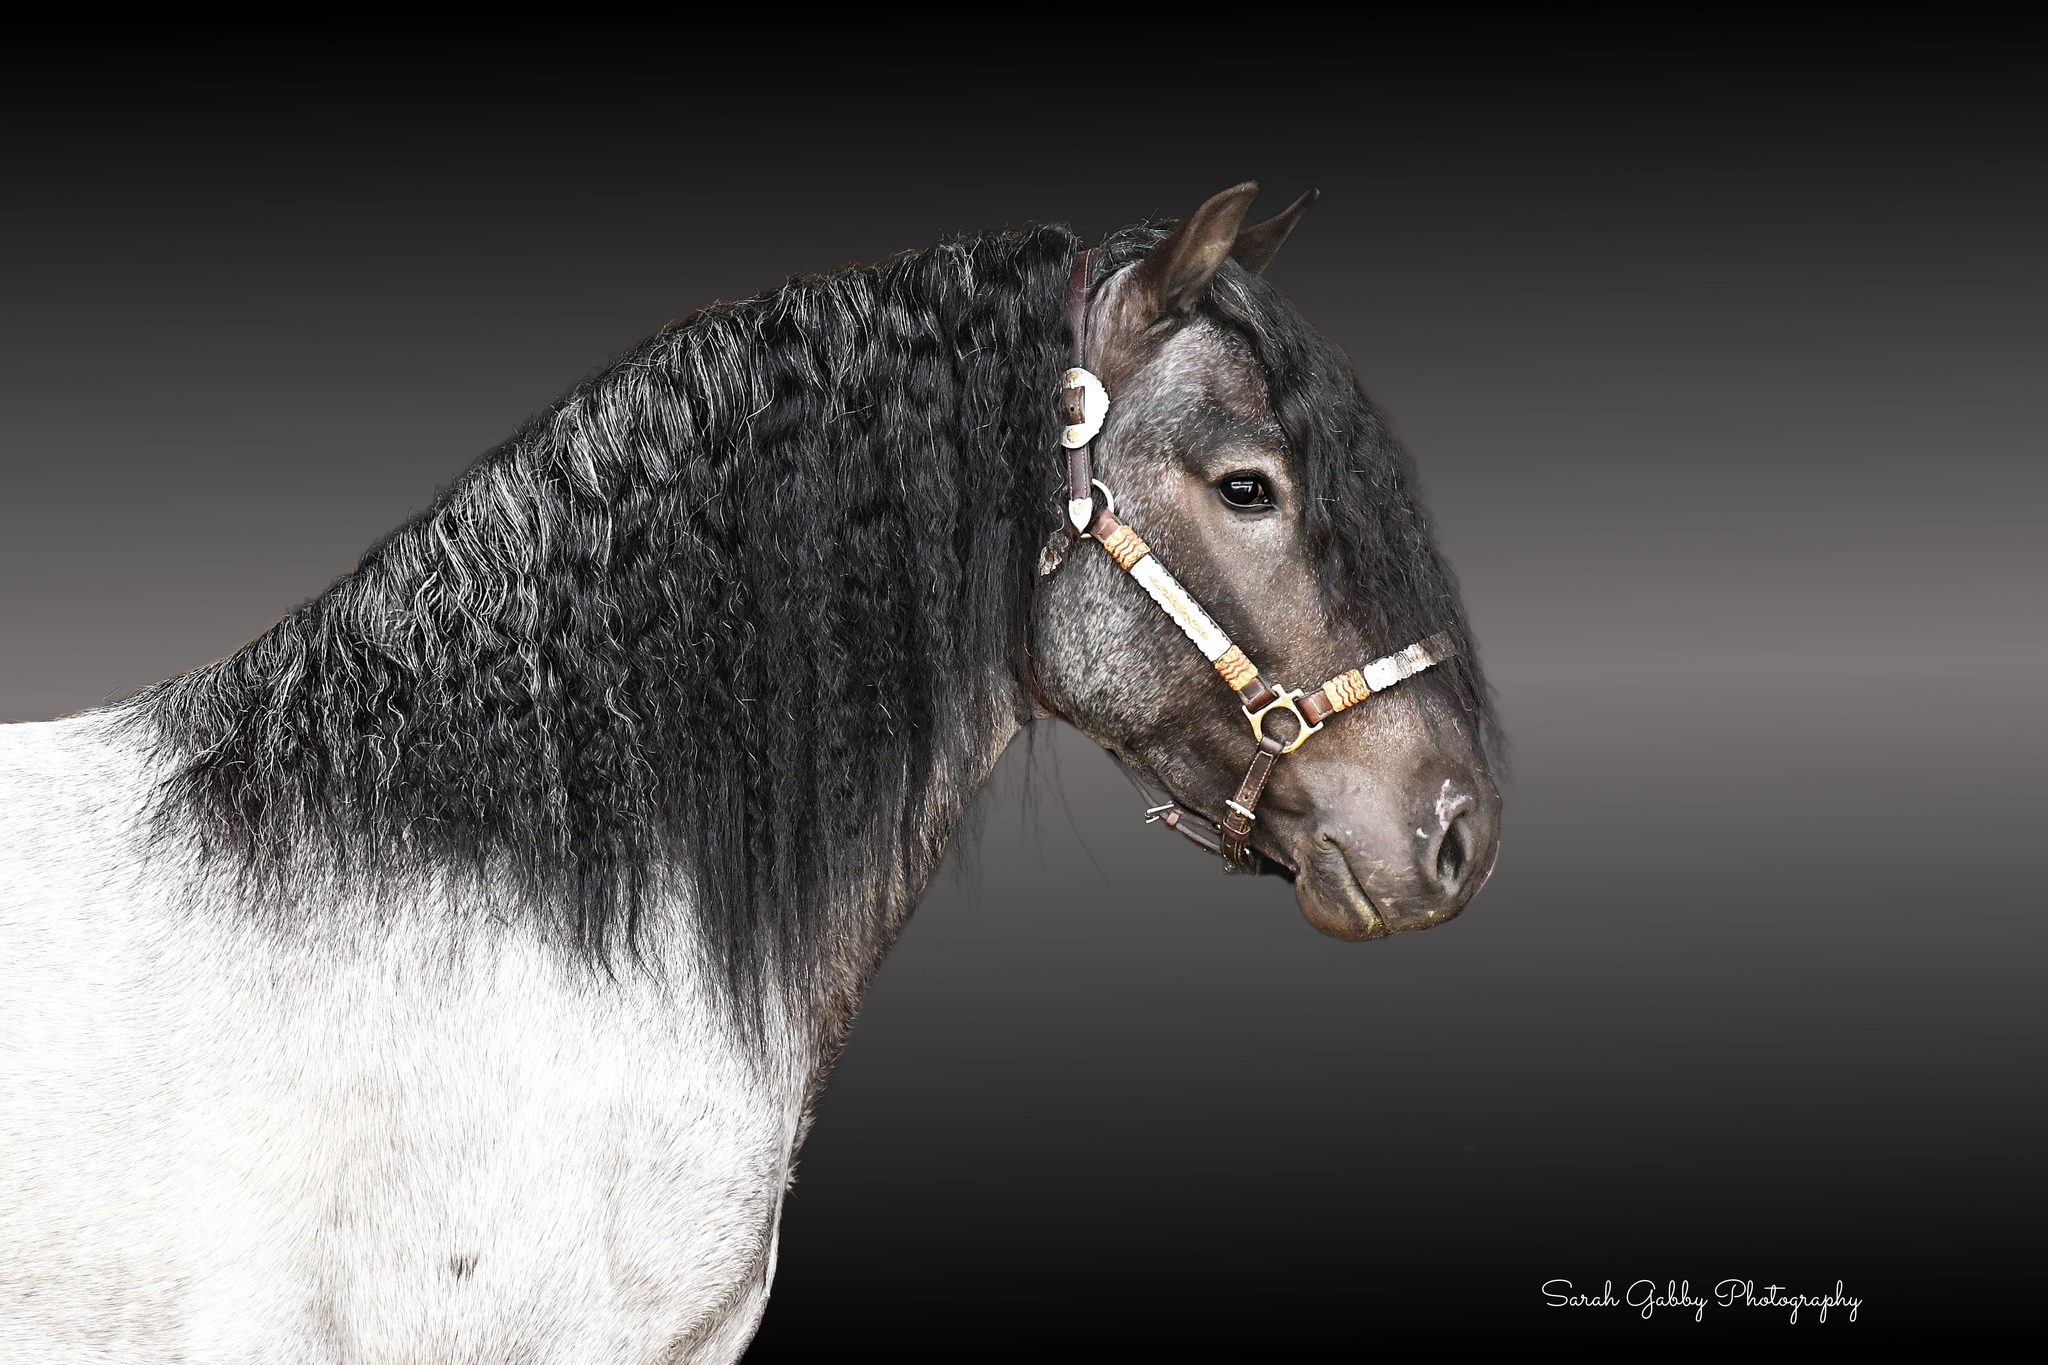 RiverPointe Blue Moon - The Blue Roan Gypsy Vanner Horse